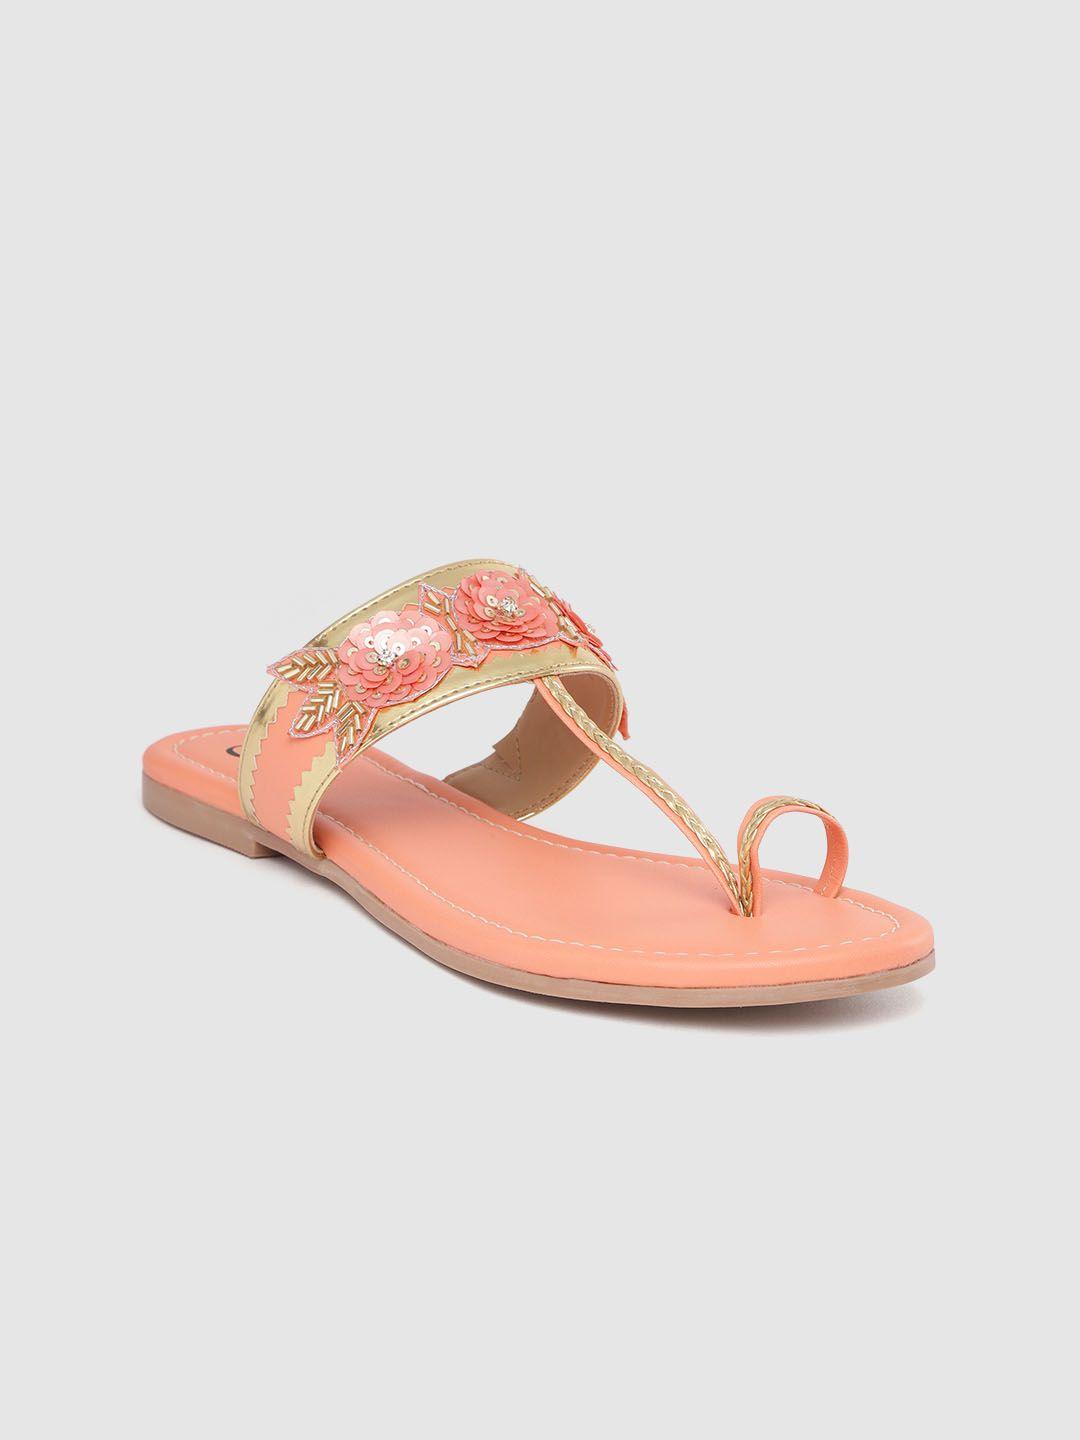 carlton london women coral pink &  gold-toned embellished one toe flats